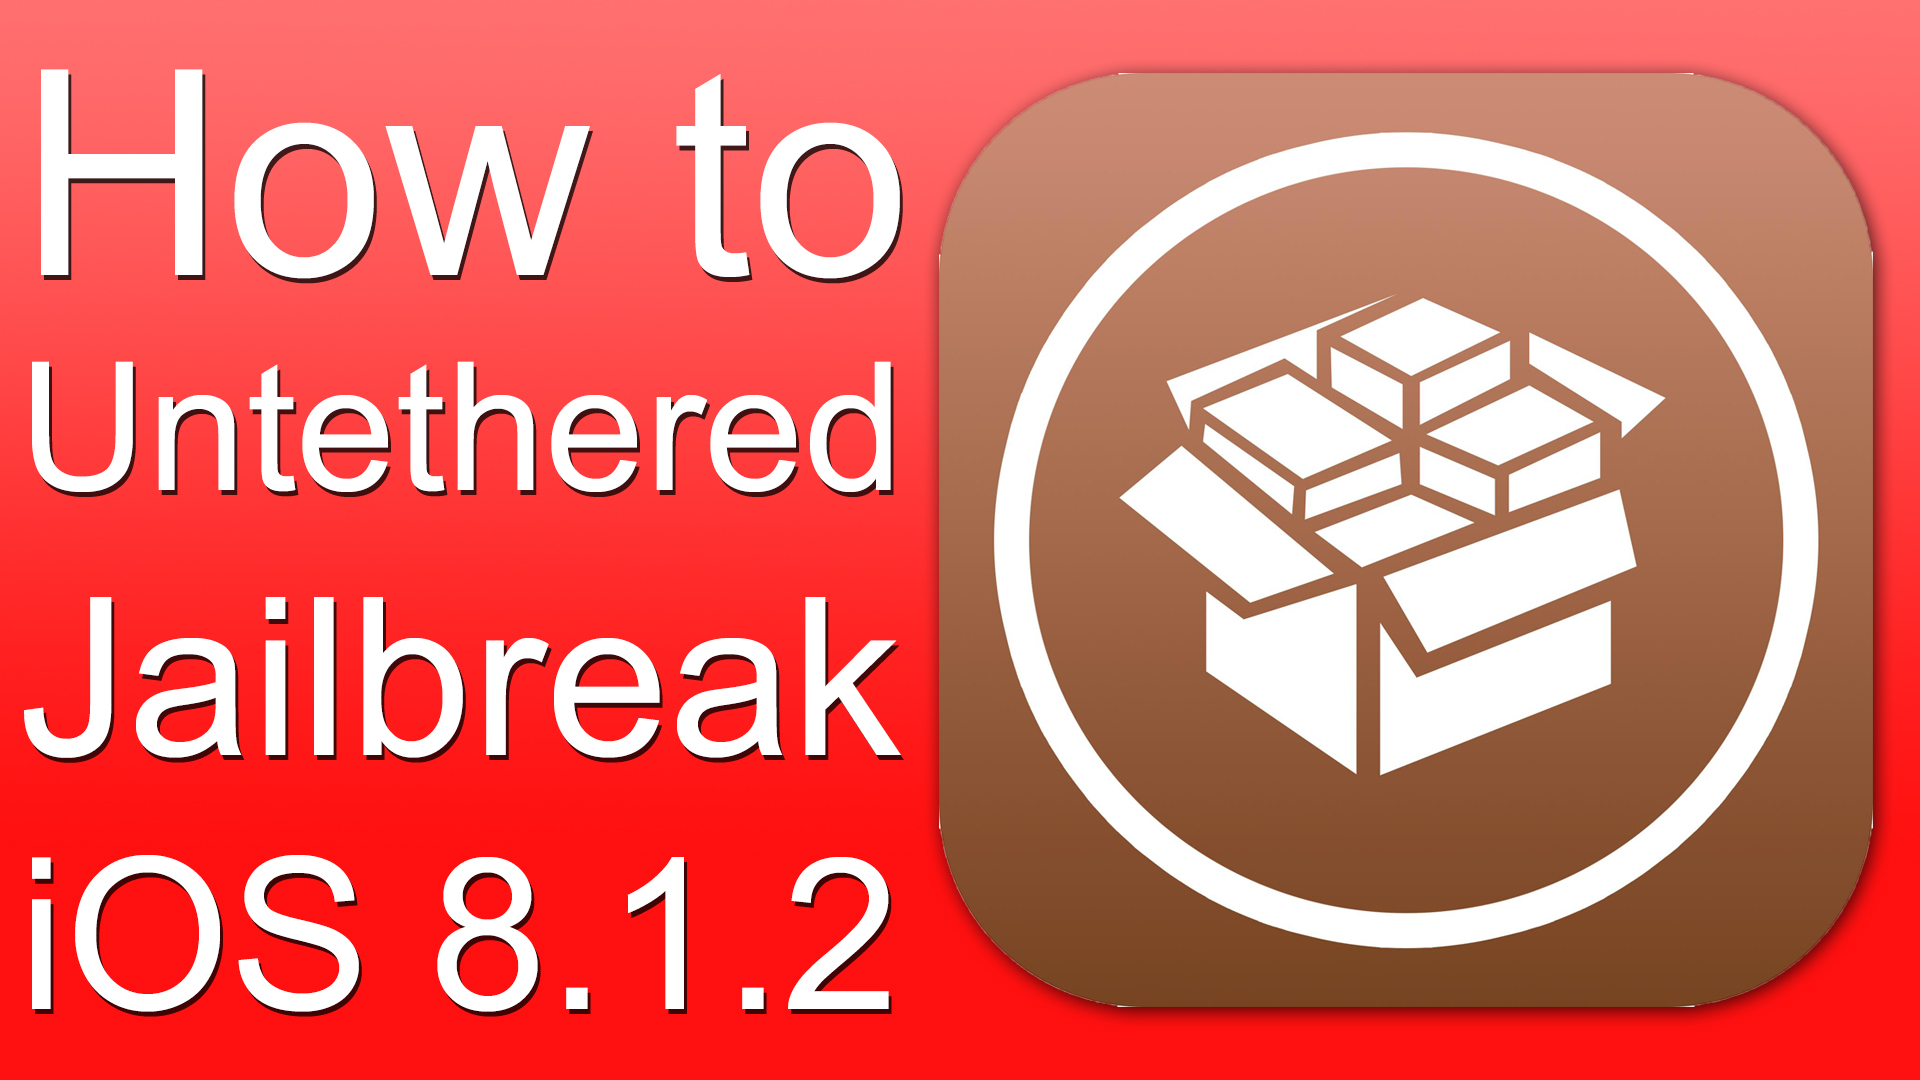 Untethered Jailbreak iOS 8.1.2 on all devices!